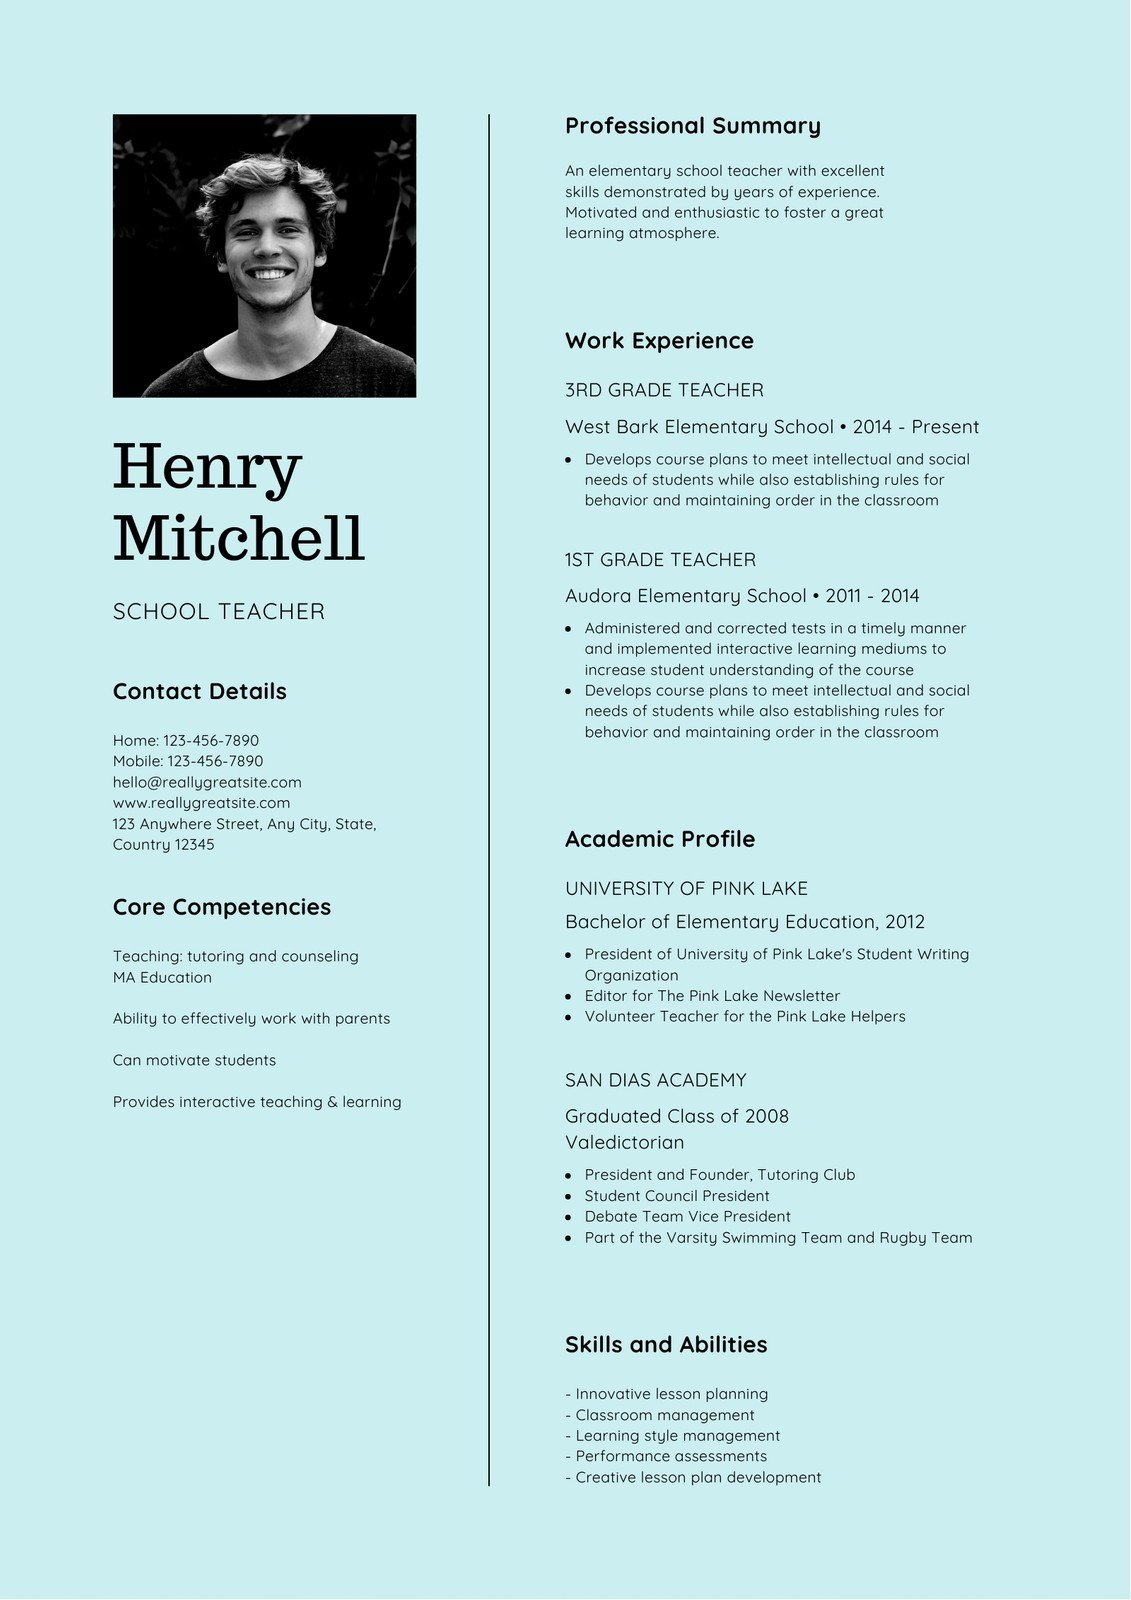 Customize 29+ Academic Resumes Templates Online - Canva